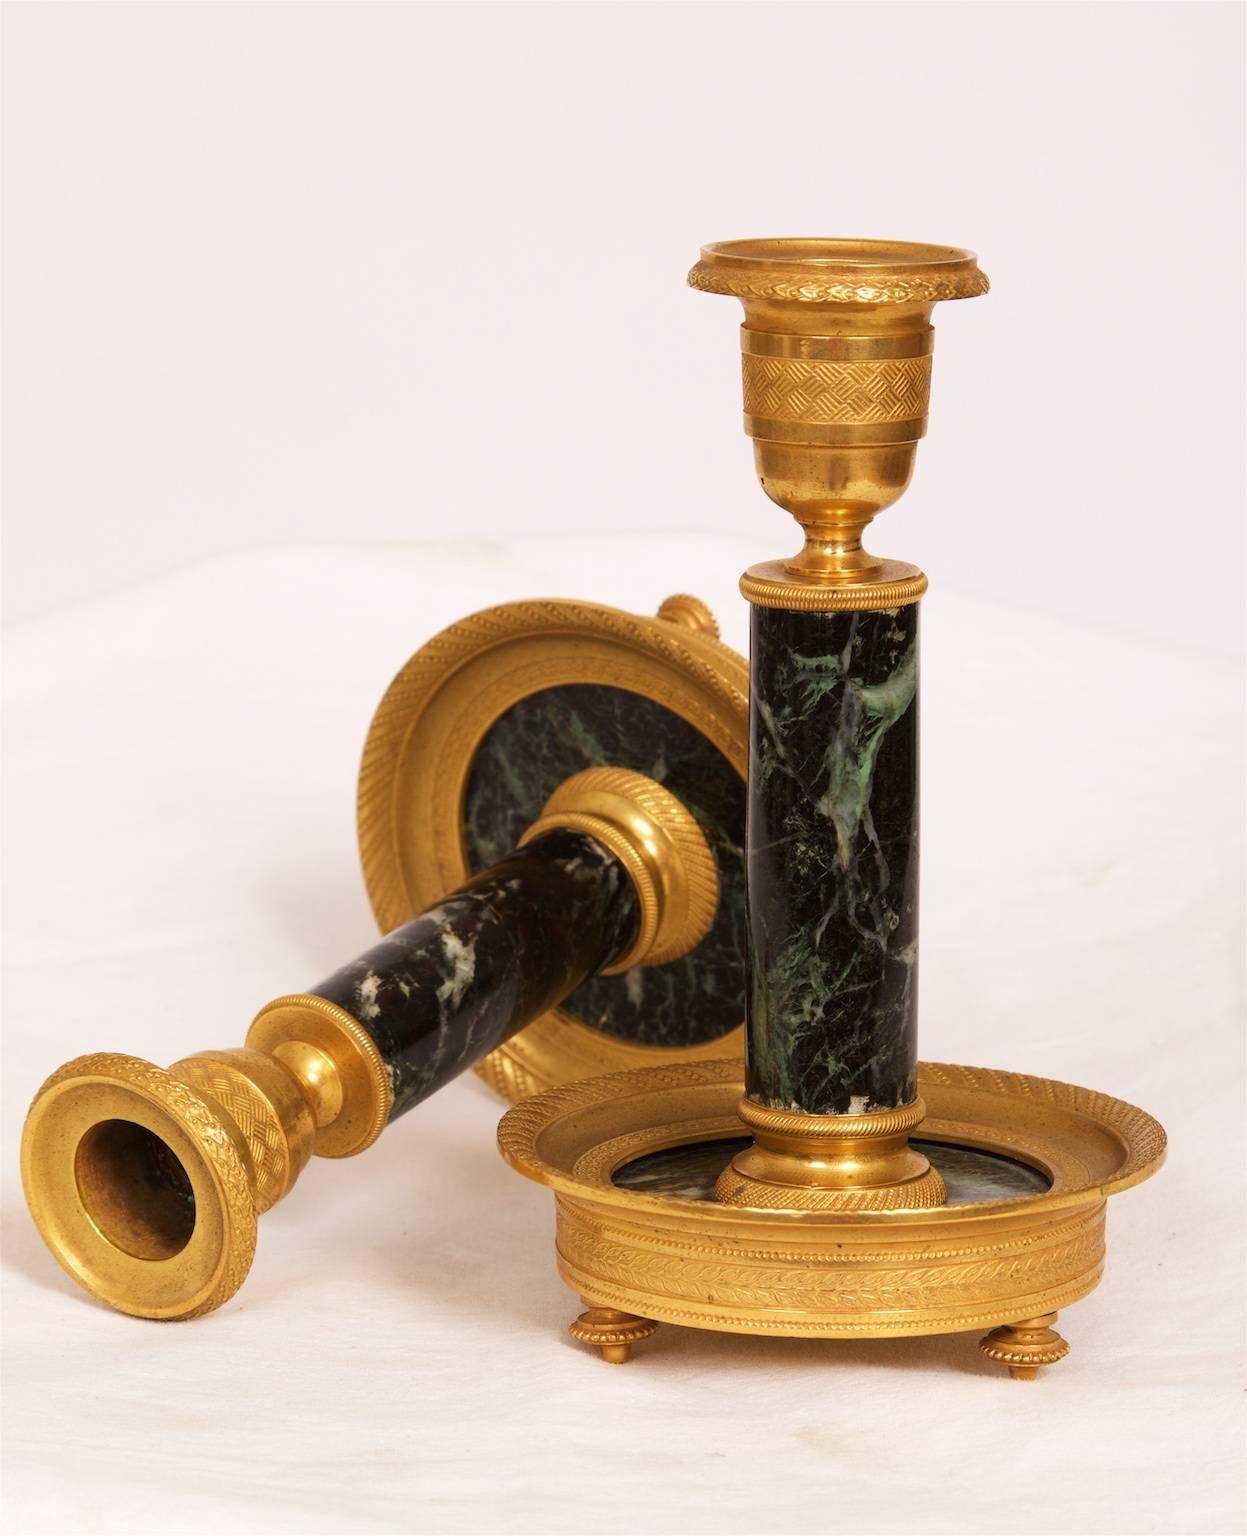 A pair of elegant gilt brass and marble candlesticks, circa 1880, France.